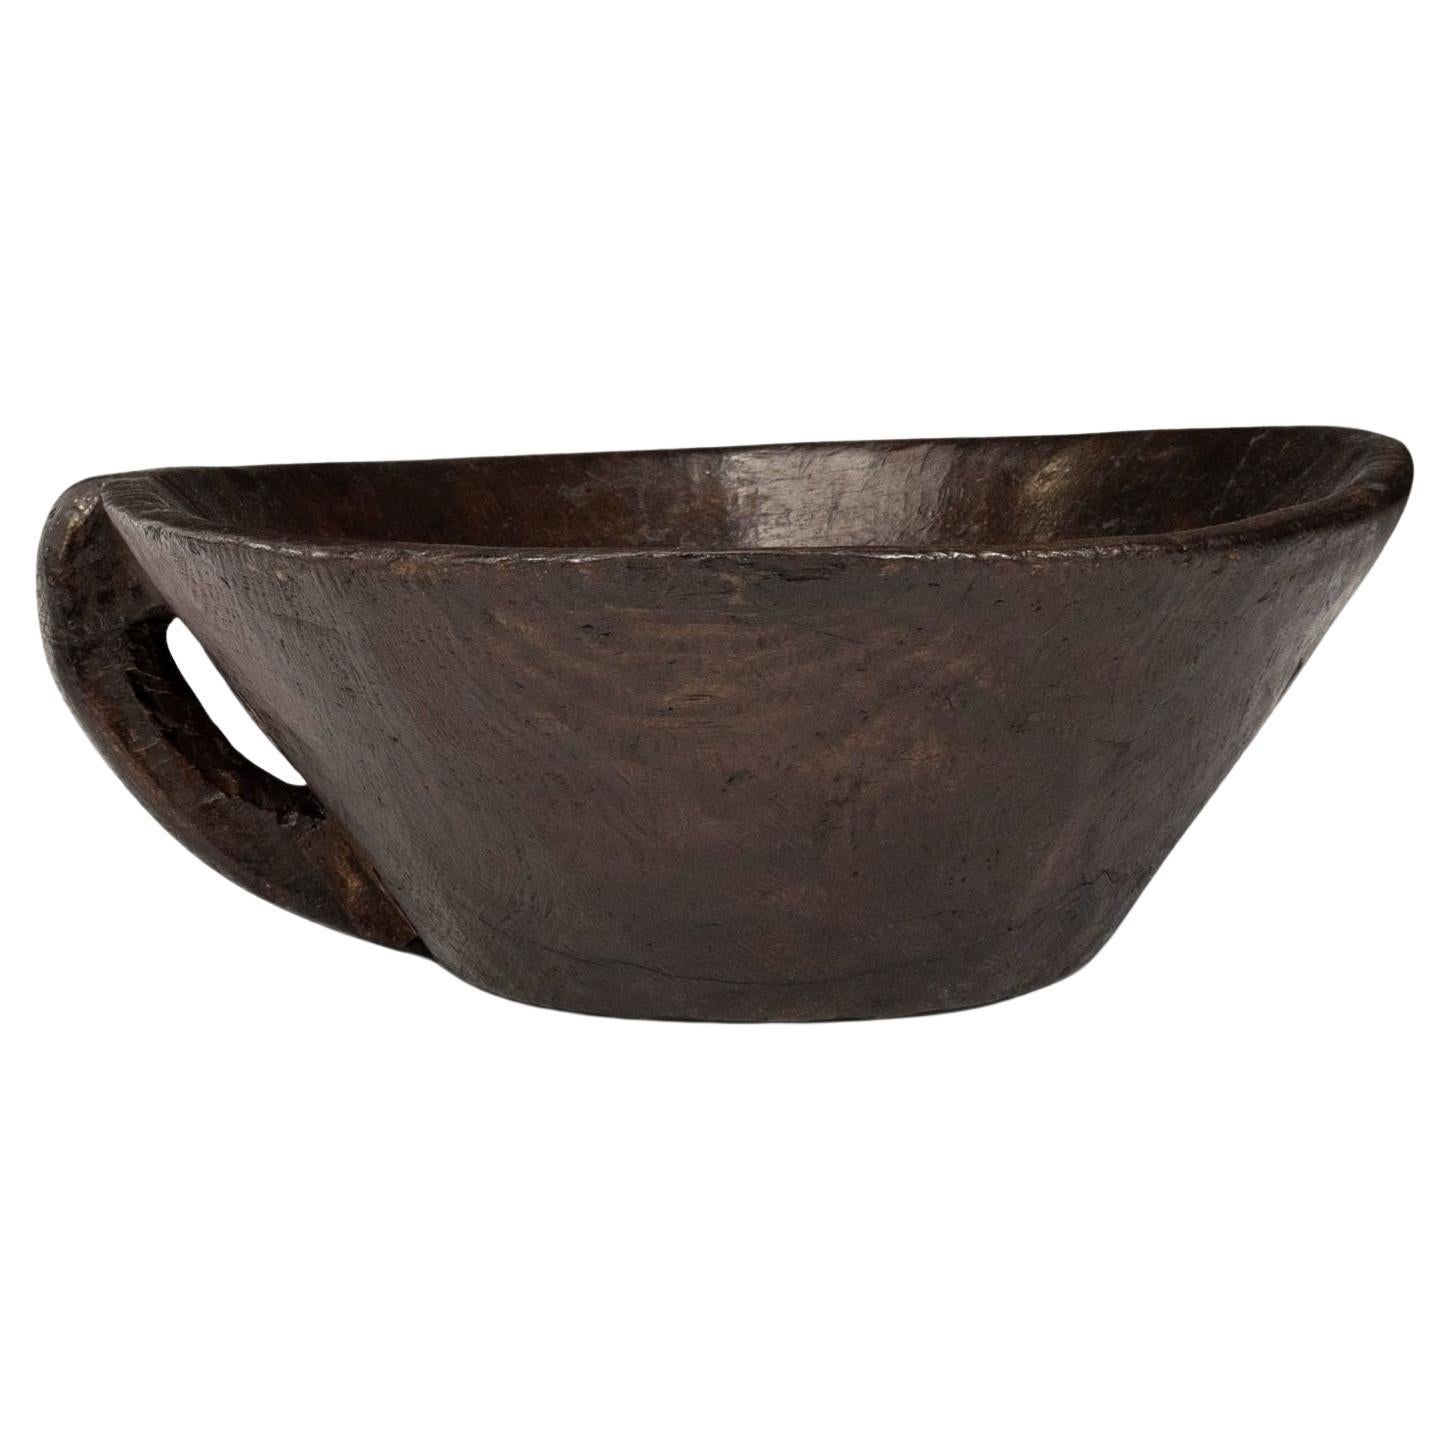 Large Primitive Bowl Hand-Carved with Handle from Hardwood